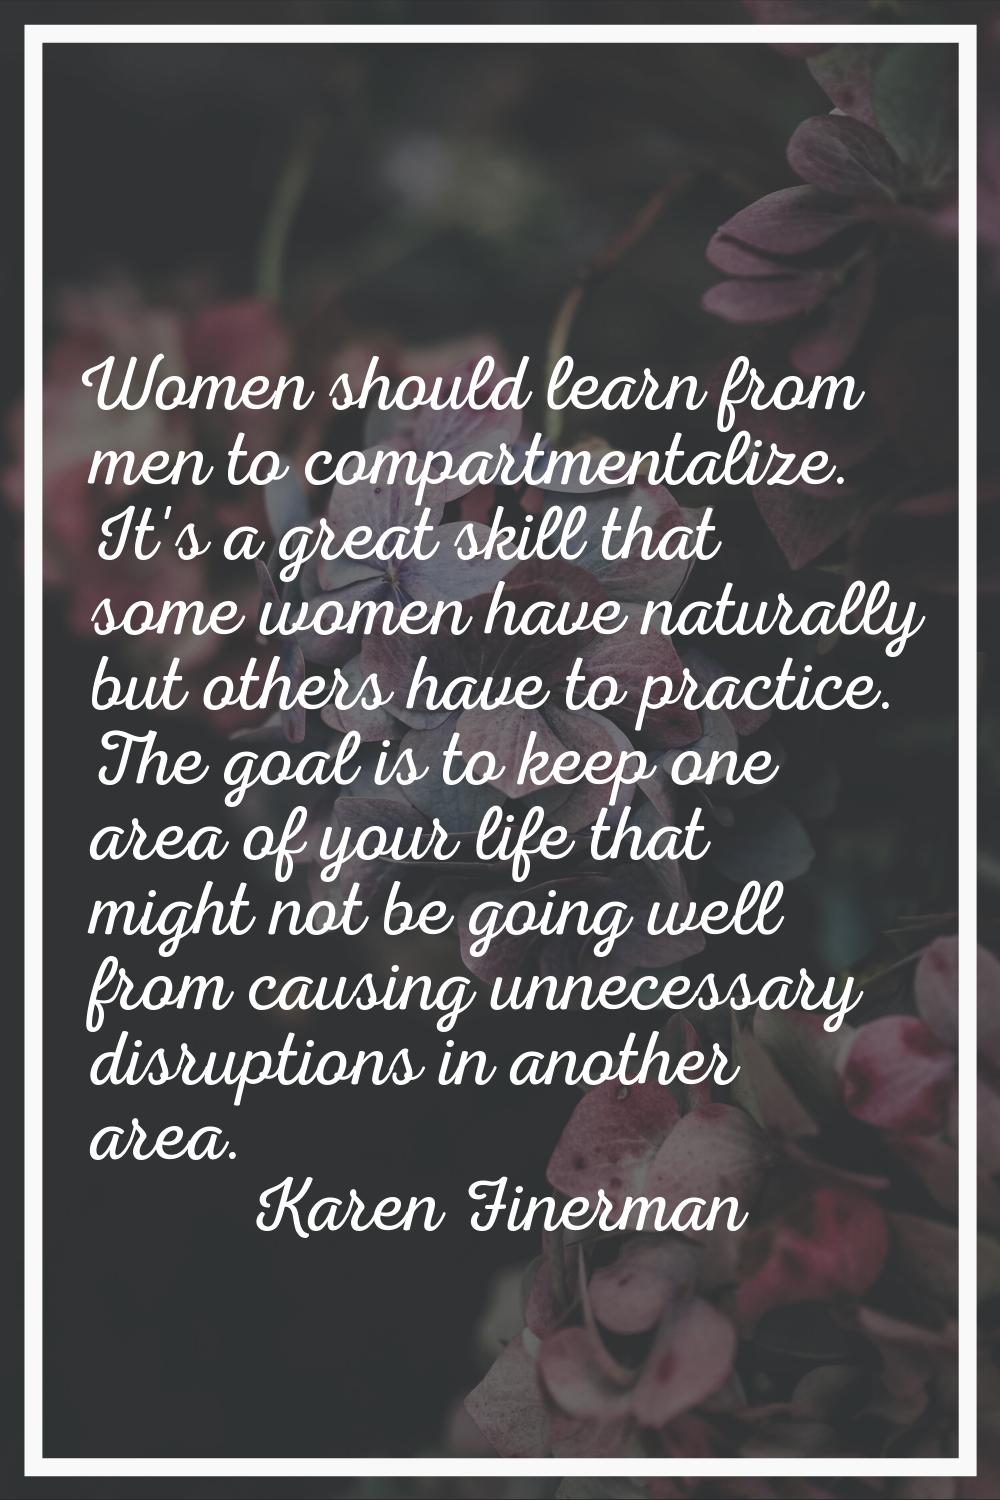 Women should learn from men to compartmentalize. It's a great skill that some women have naturally 